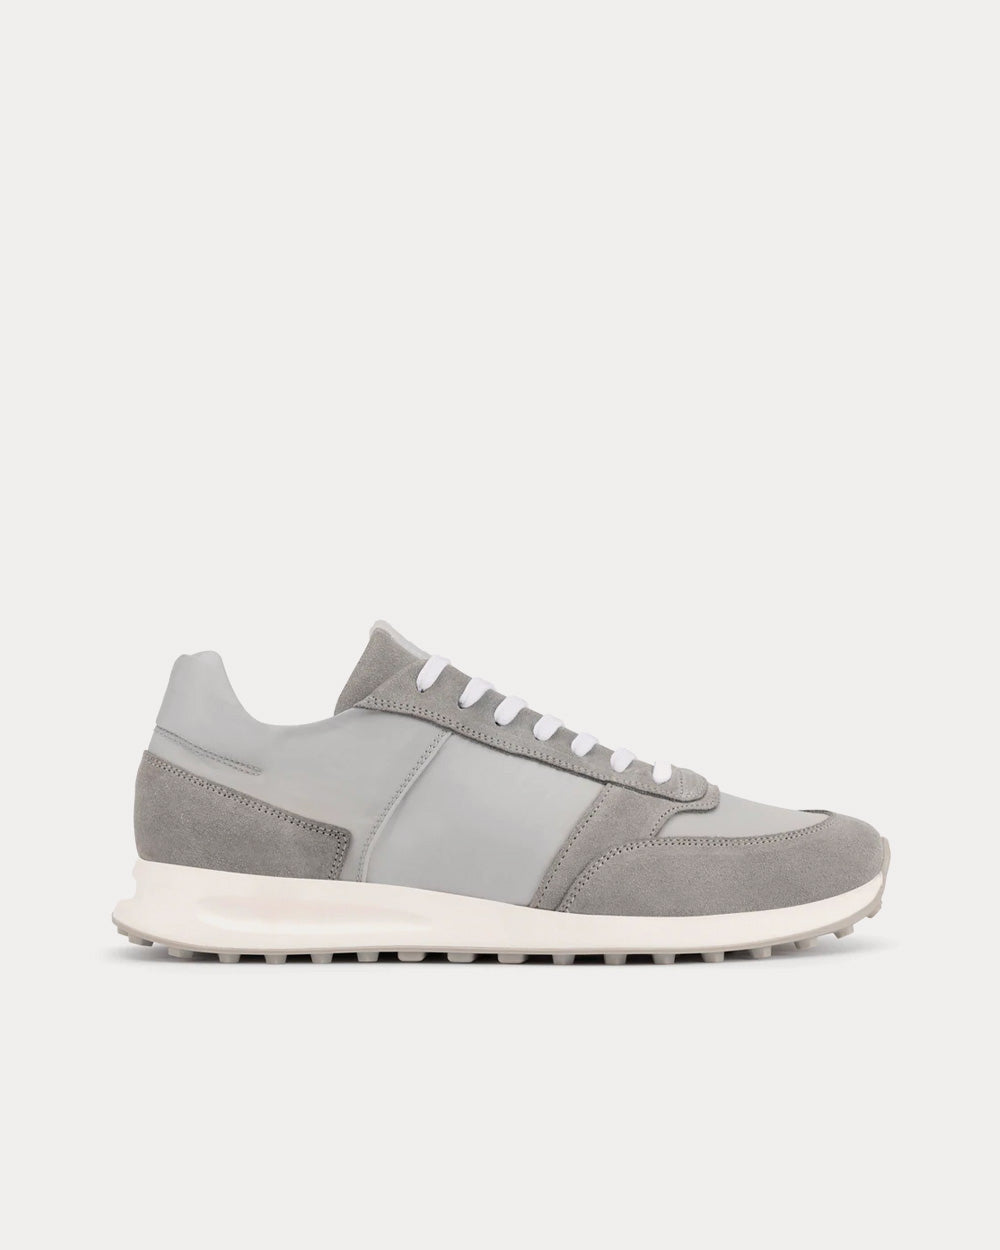 ETQ - RS 01 NYLN Light Grey / White Low Top Sneakers